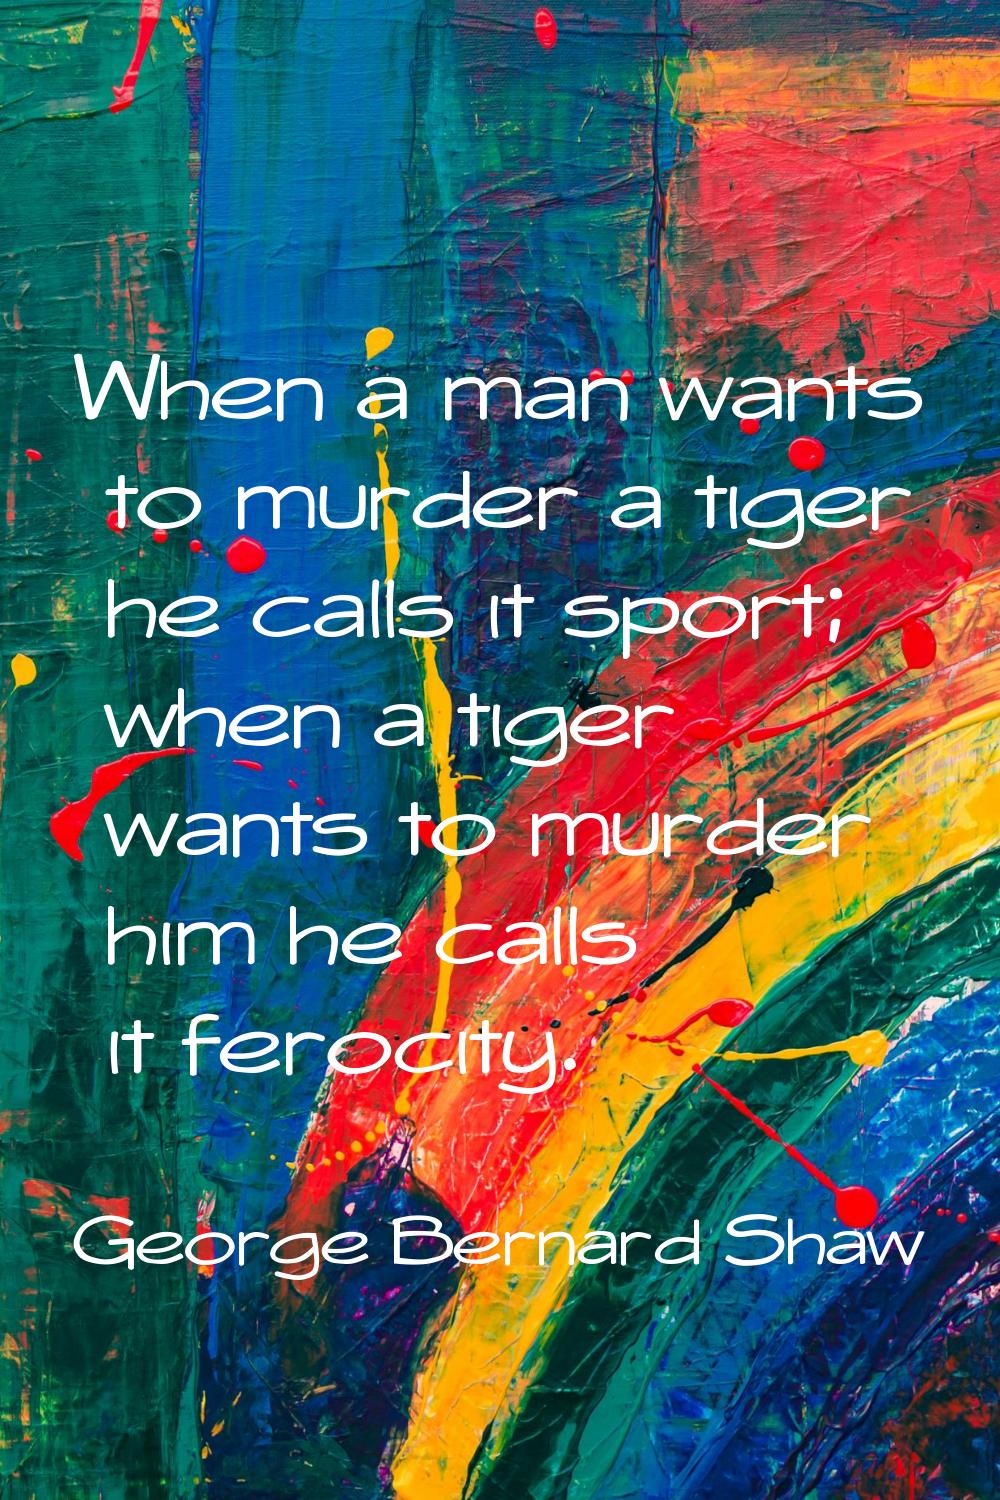 When a man wants to murder a tiger he calls it sport; when a tiger wants to murder him he calls it 